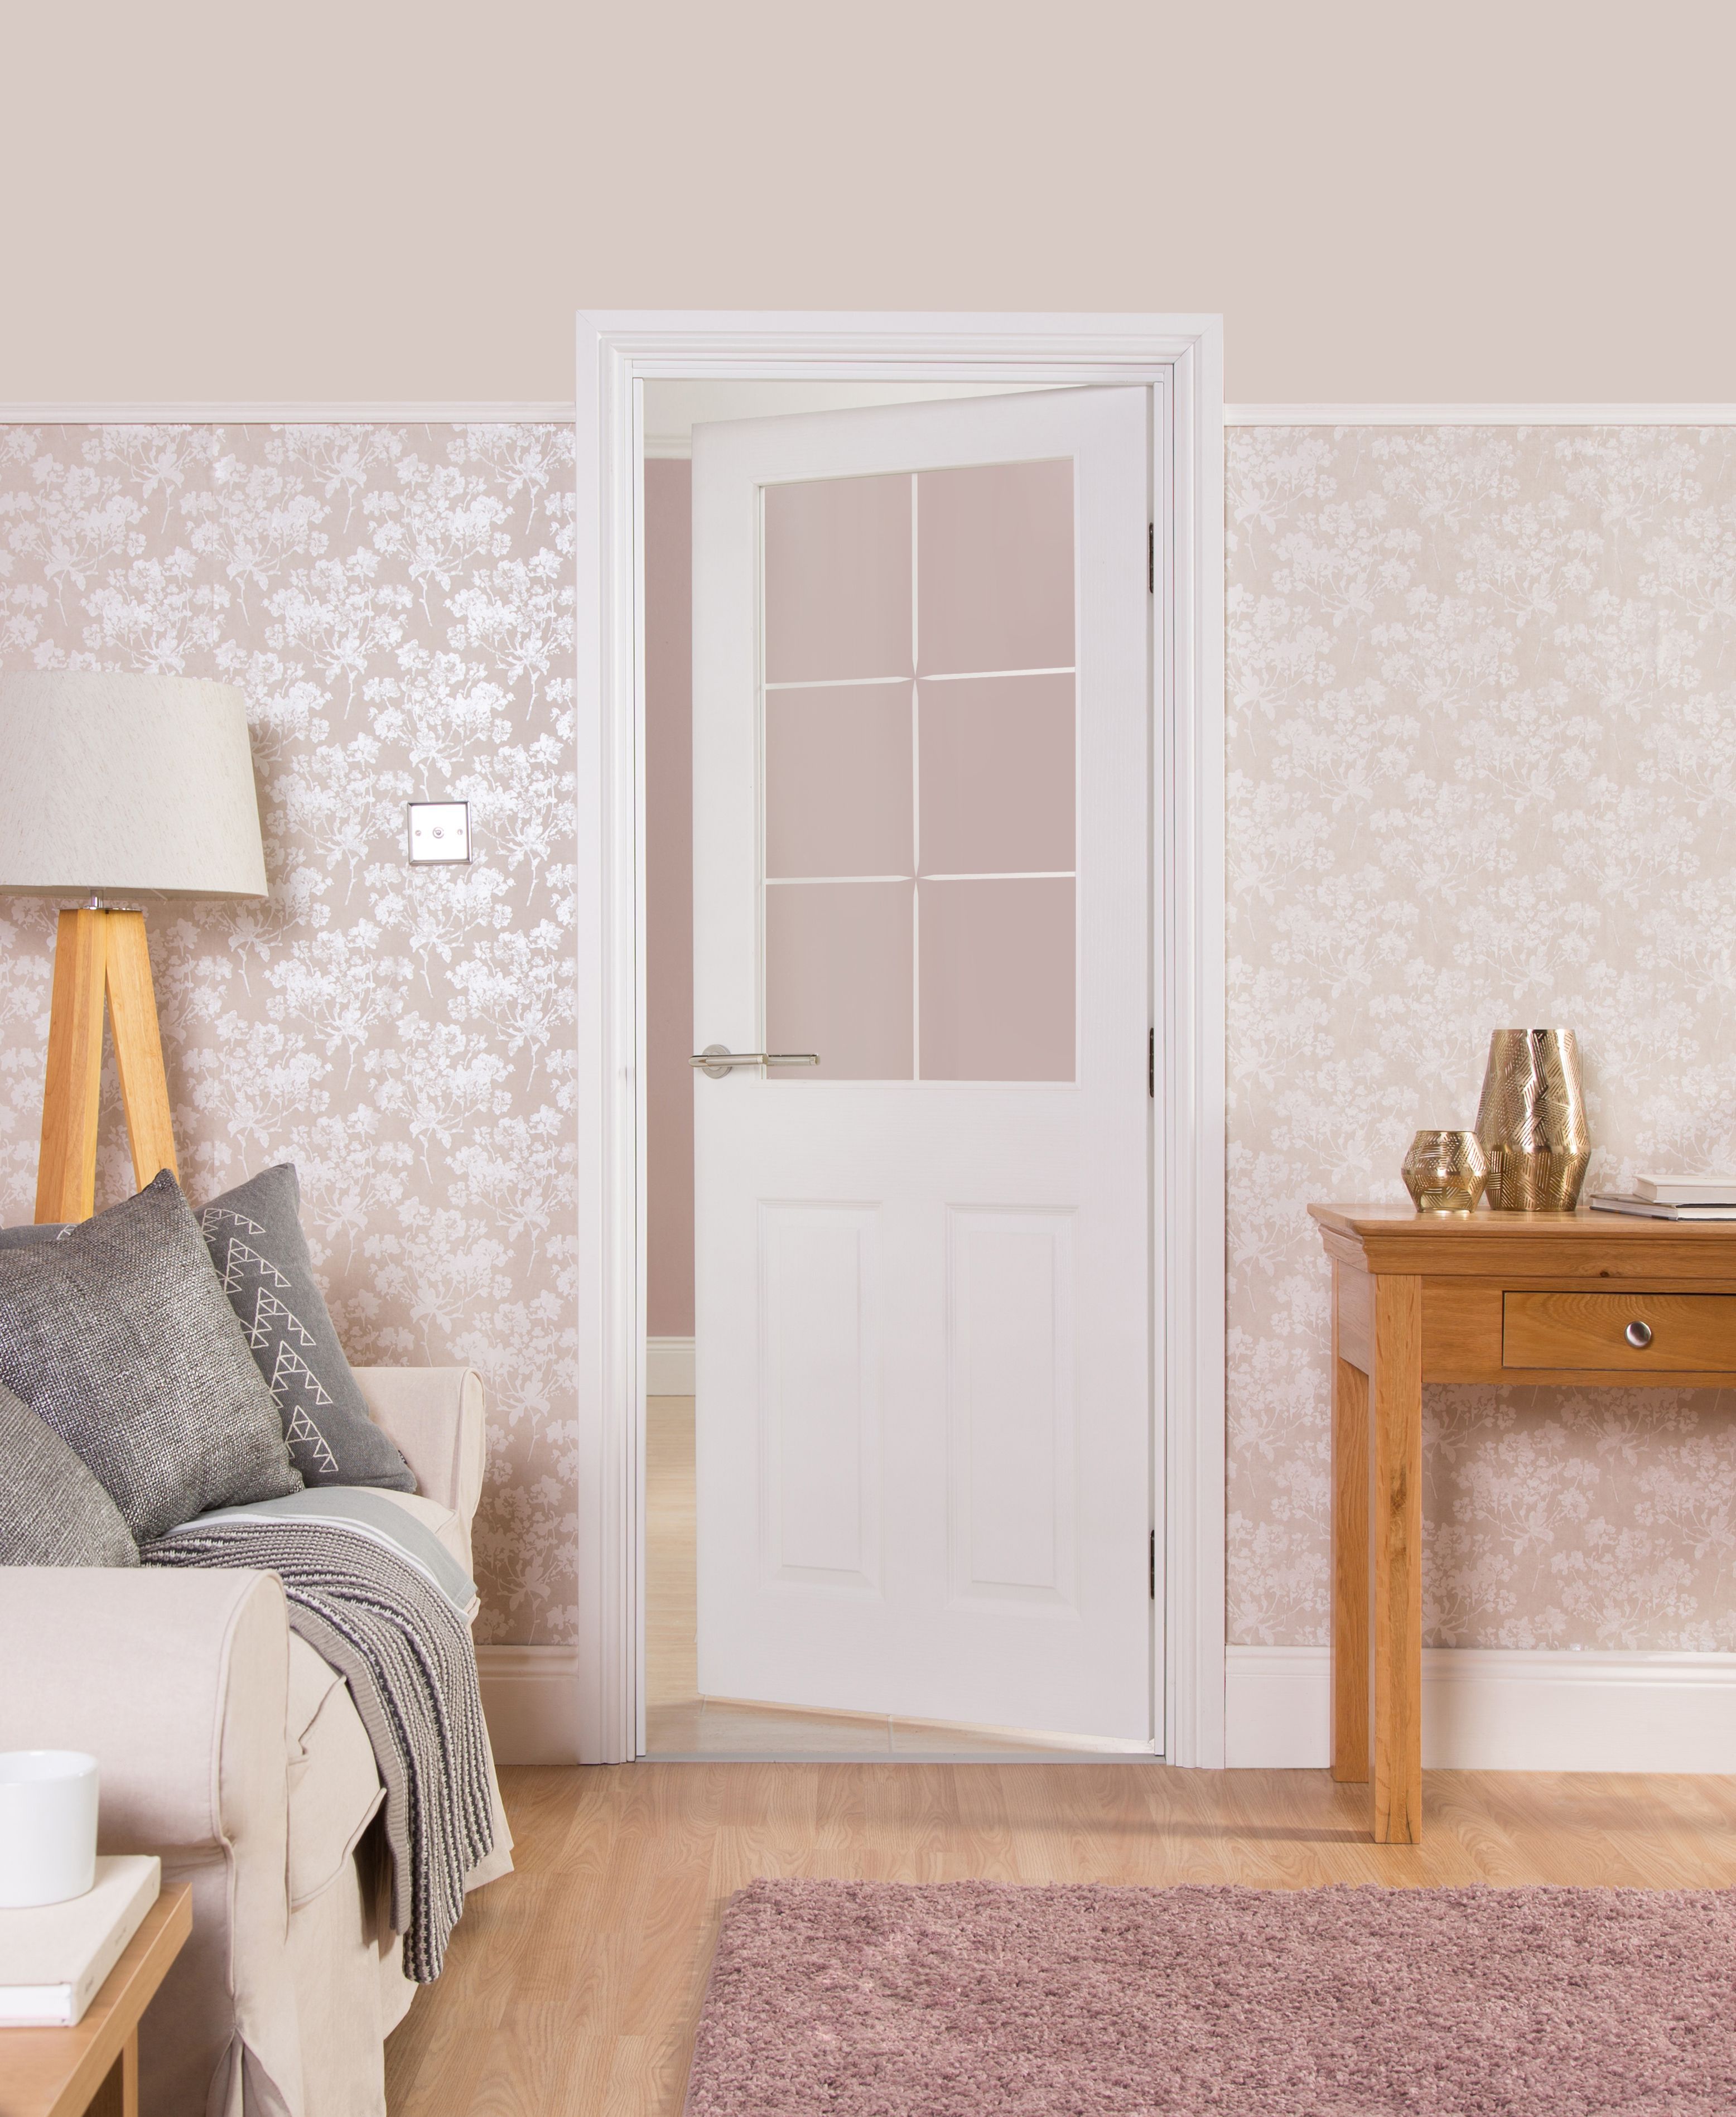 Jeld-Wen Painted 2 panel 6 Lite Clear Glazed Contemporary White Internal Door, (H)2040mm (W)726mm (T)40mm